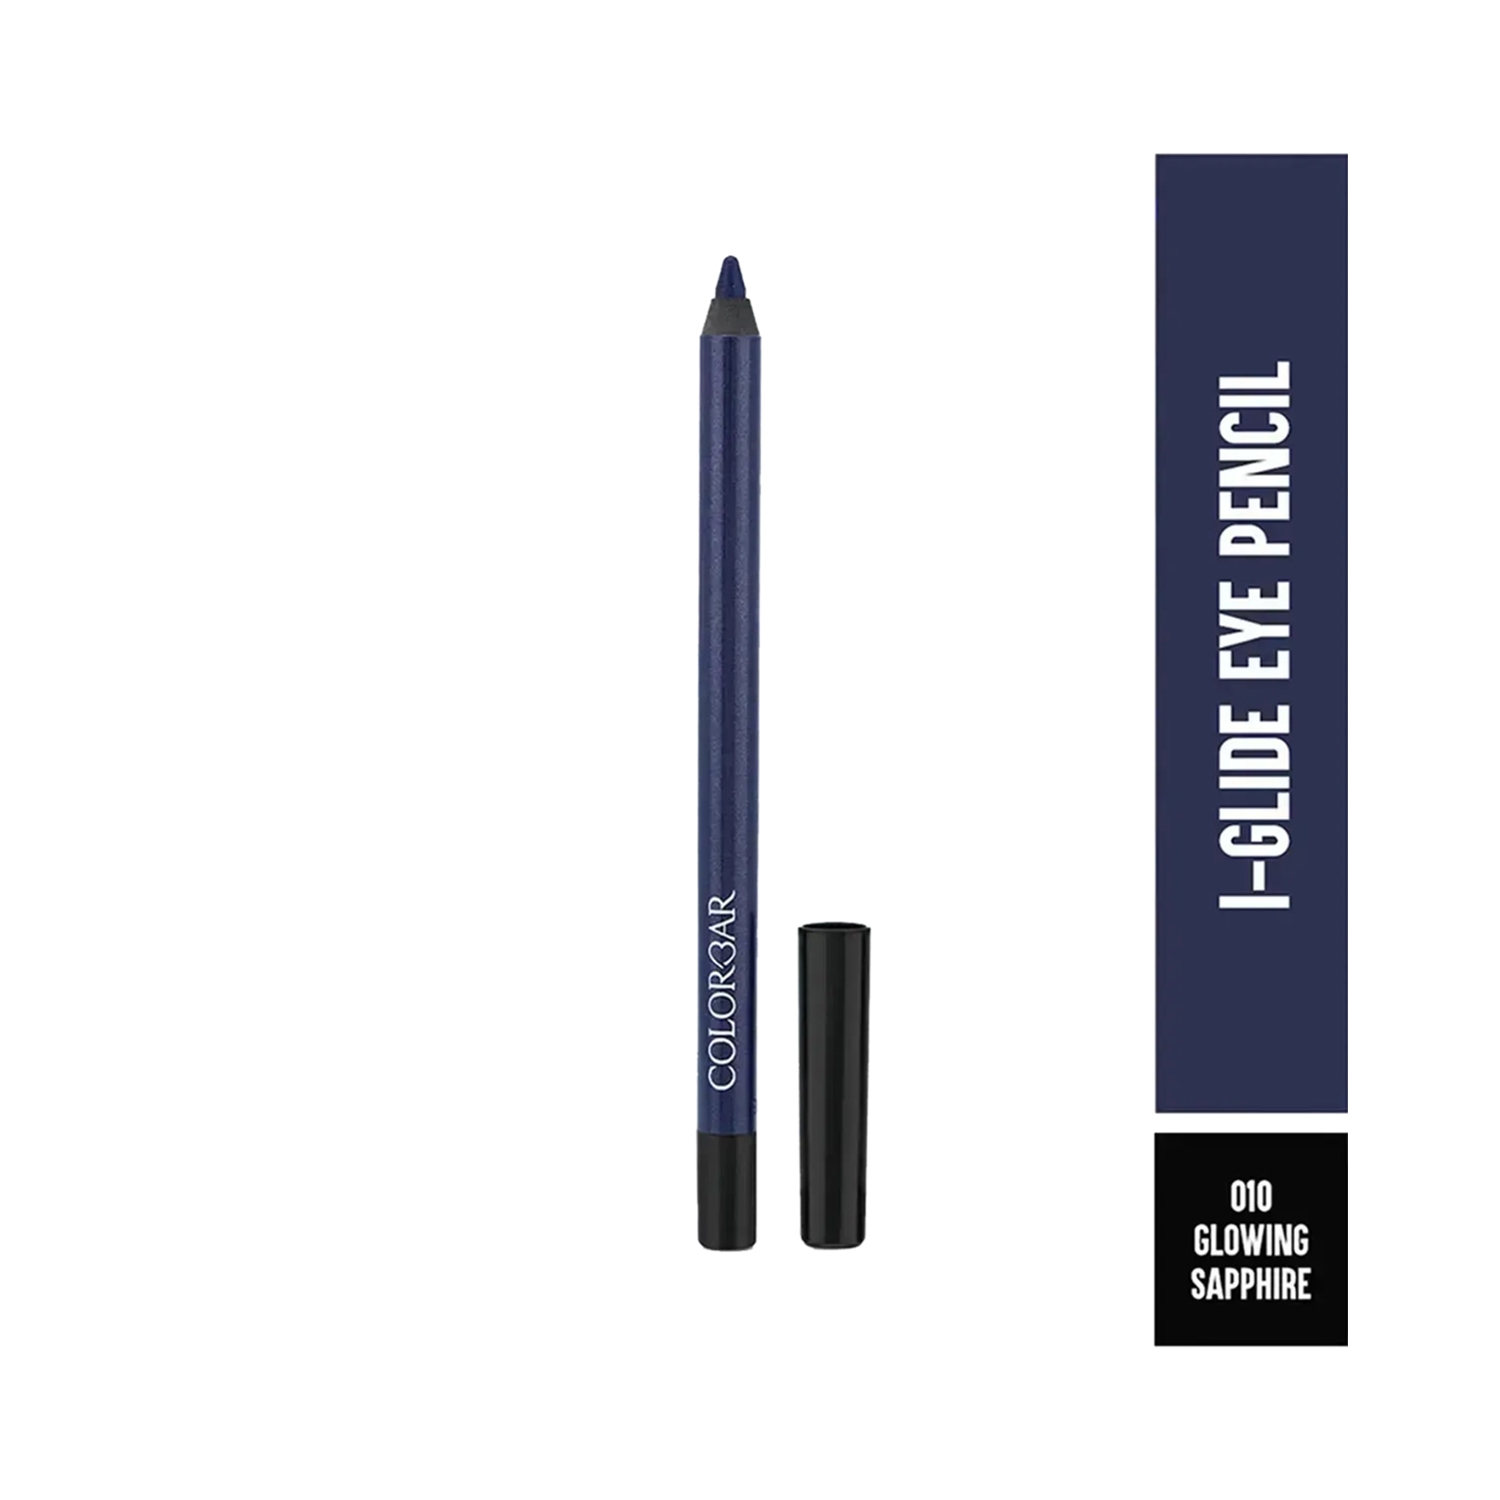 Colorbar | Colorbar I-Glide Eye Liner Pencil - 010 Glowing Sapphire (1.1gm)